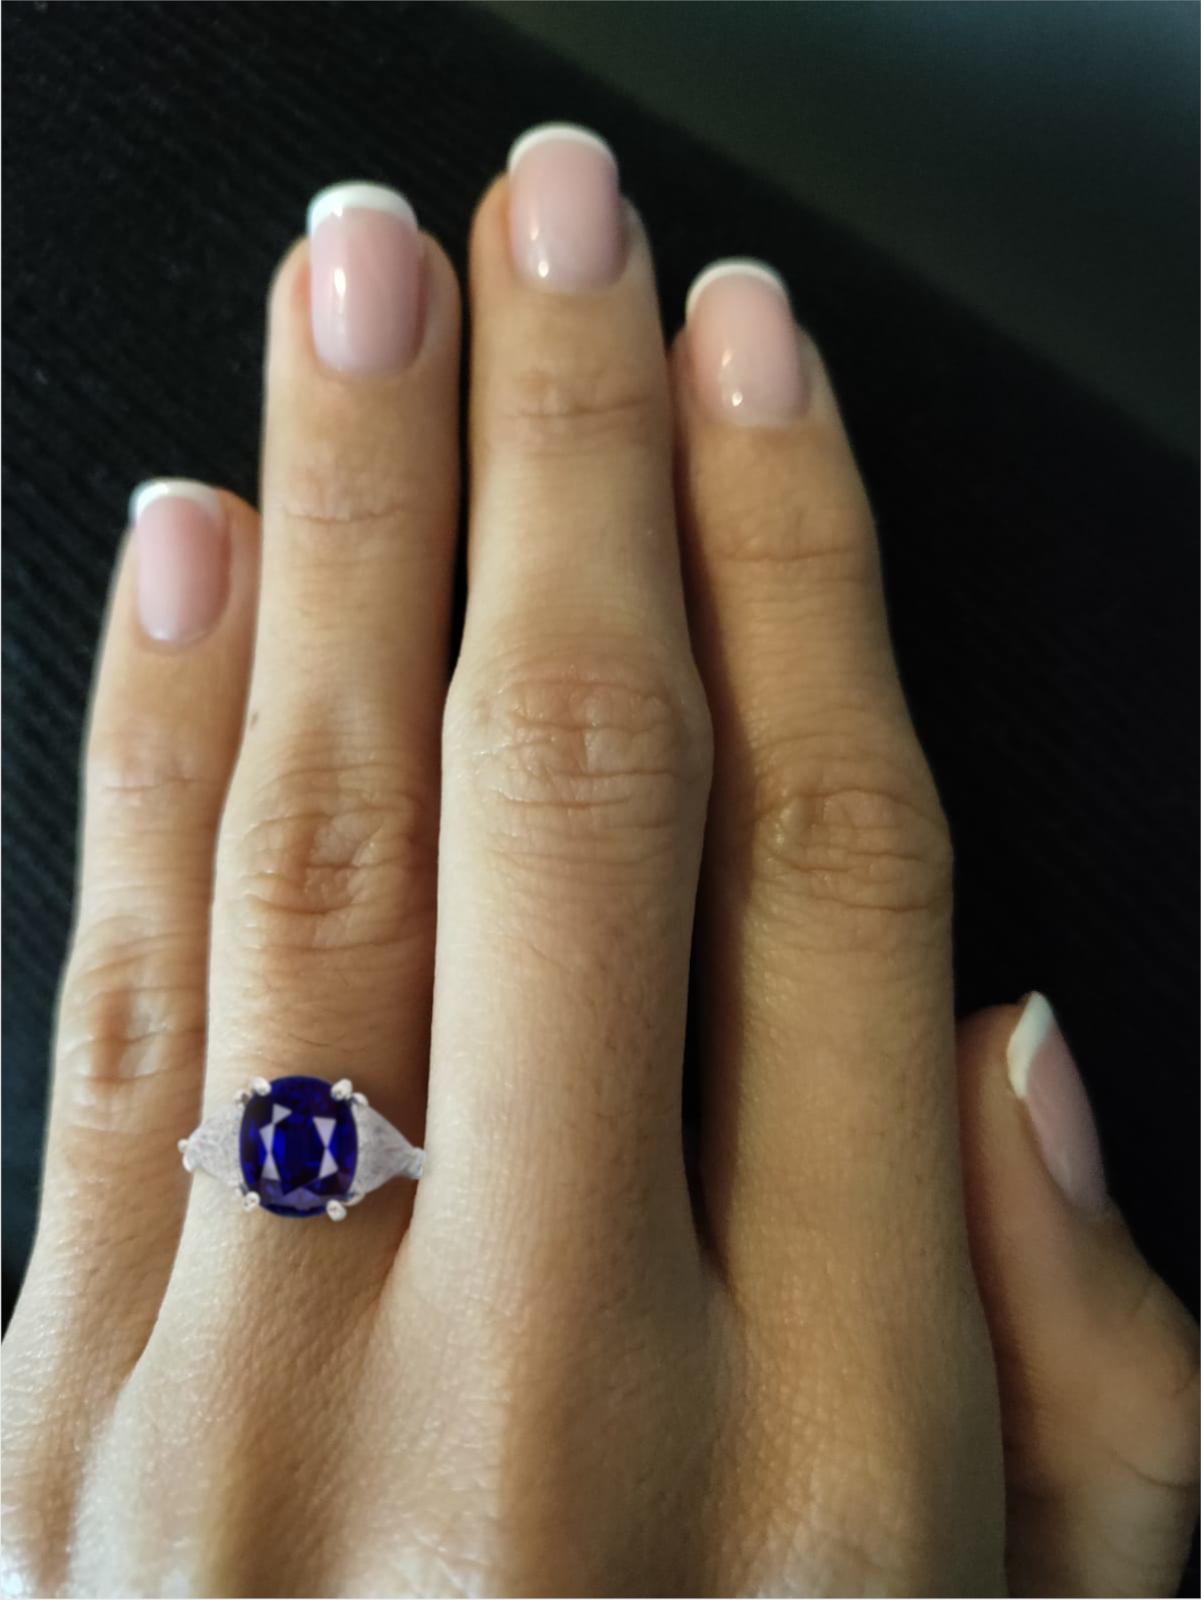 Gorgeous cushion cut GIA certified sapphire is a gorgeous royal blue color. It is a richly saturated and perfectly even deep blue color. 

GIA certified sapphire is a gorgeous deep blue color. It is a richly saturated and perfectly even blue hue.